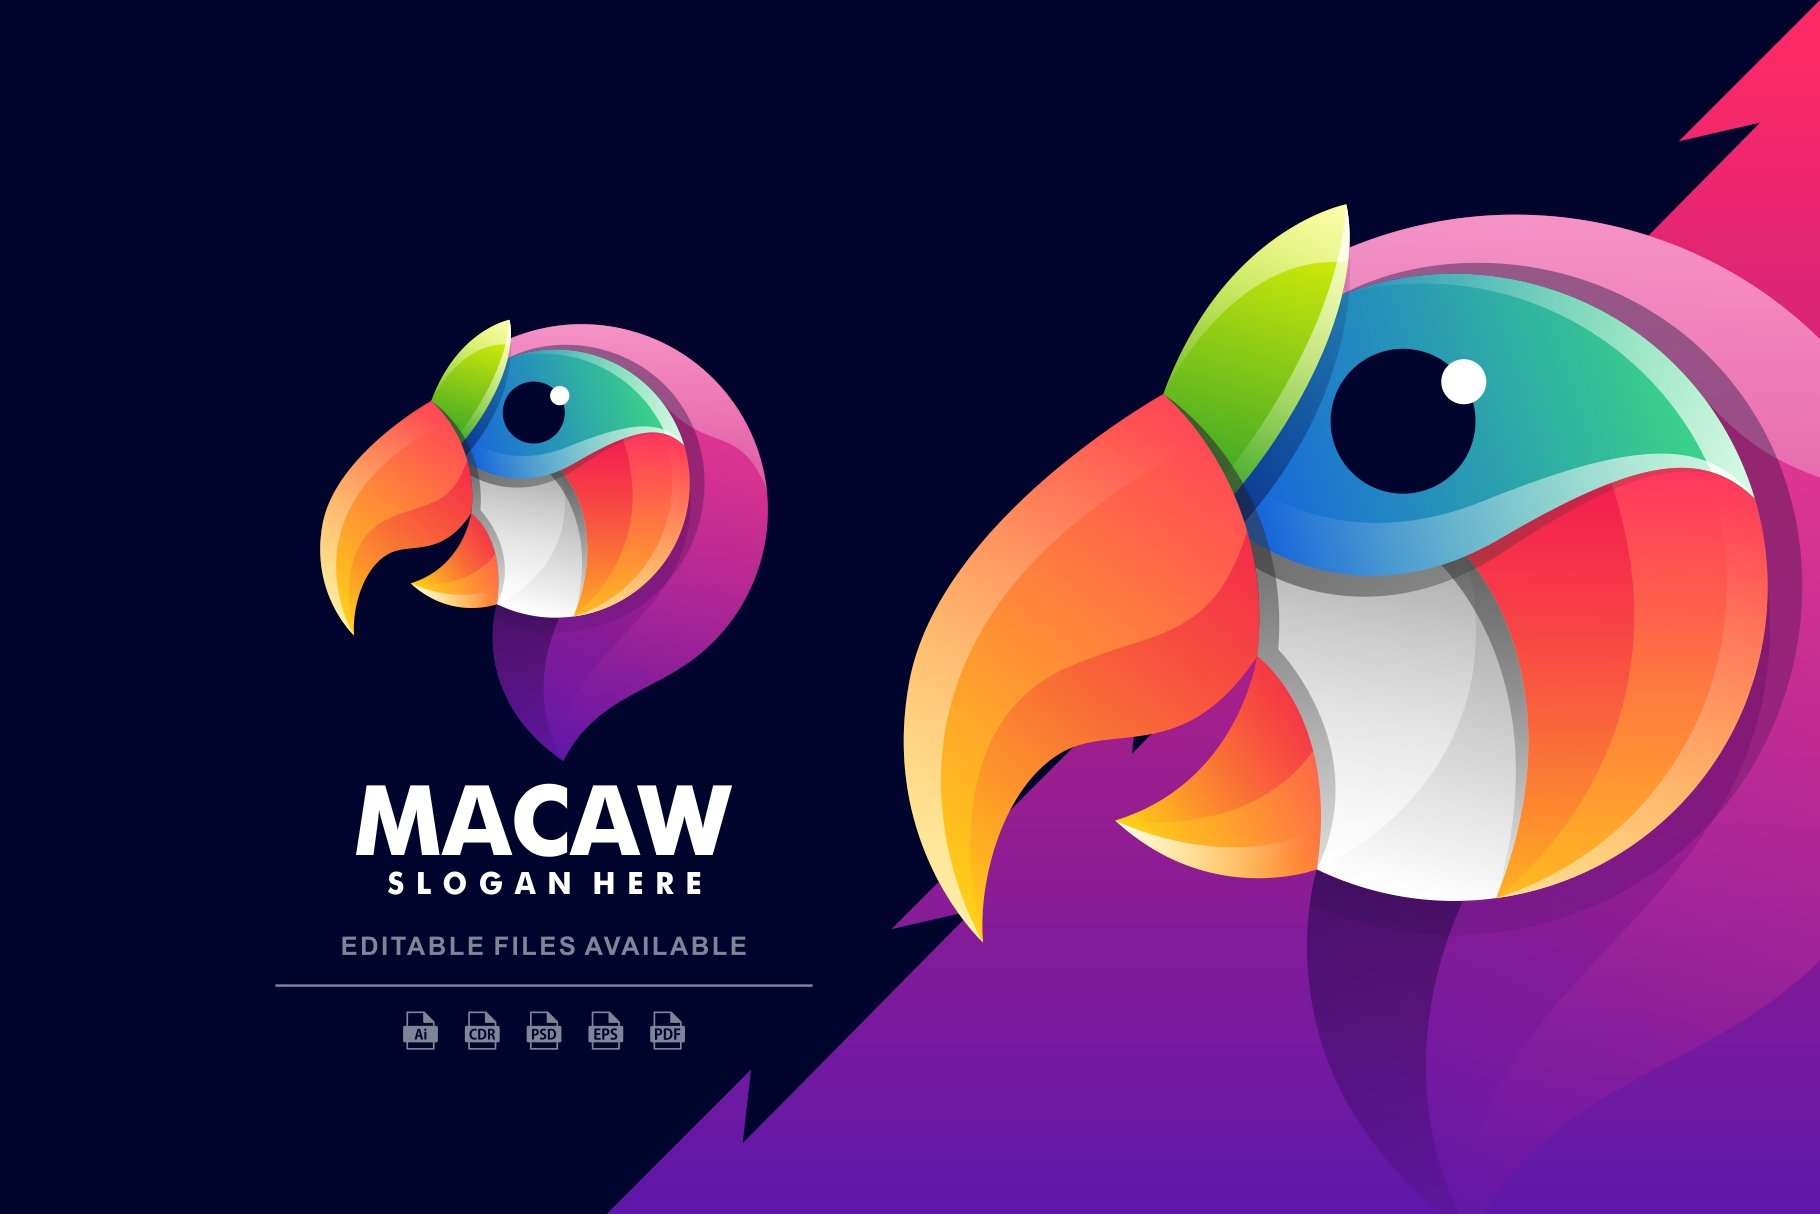 Macaw Colorful Logo cover image.